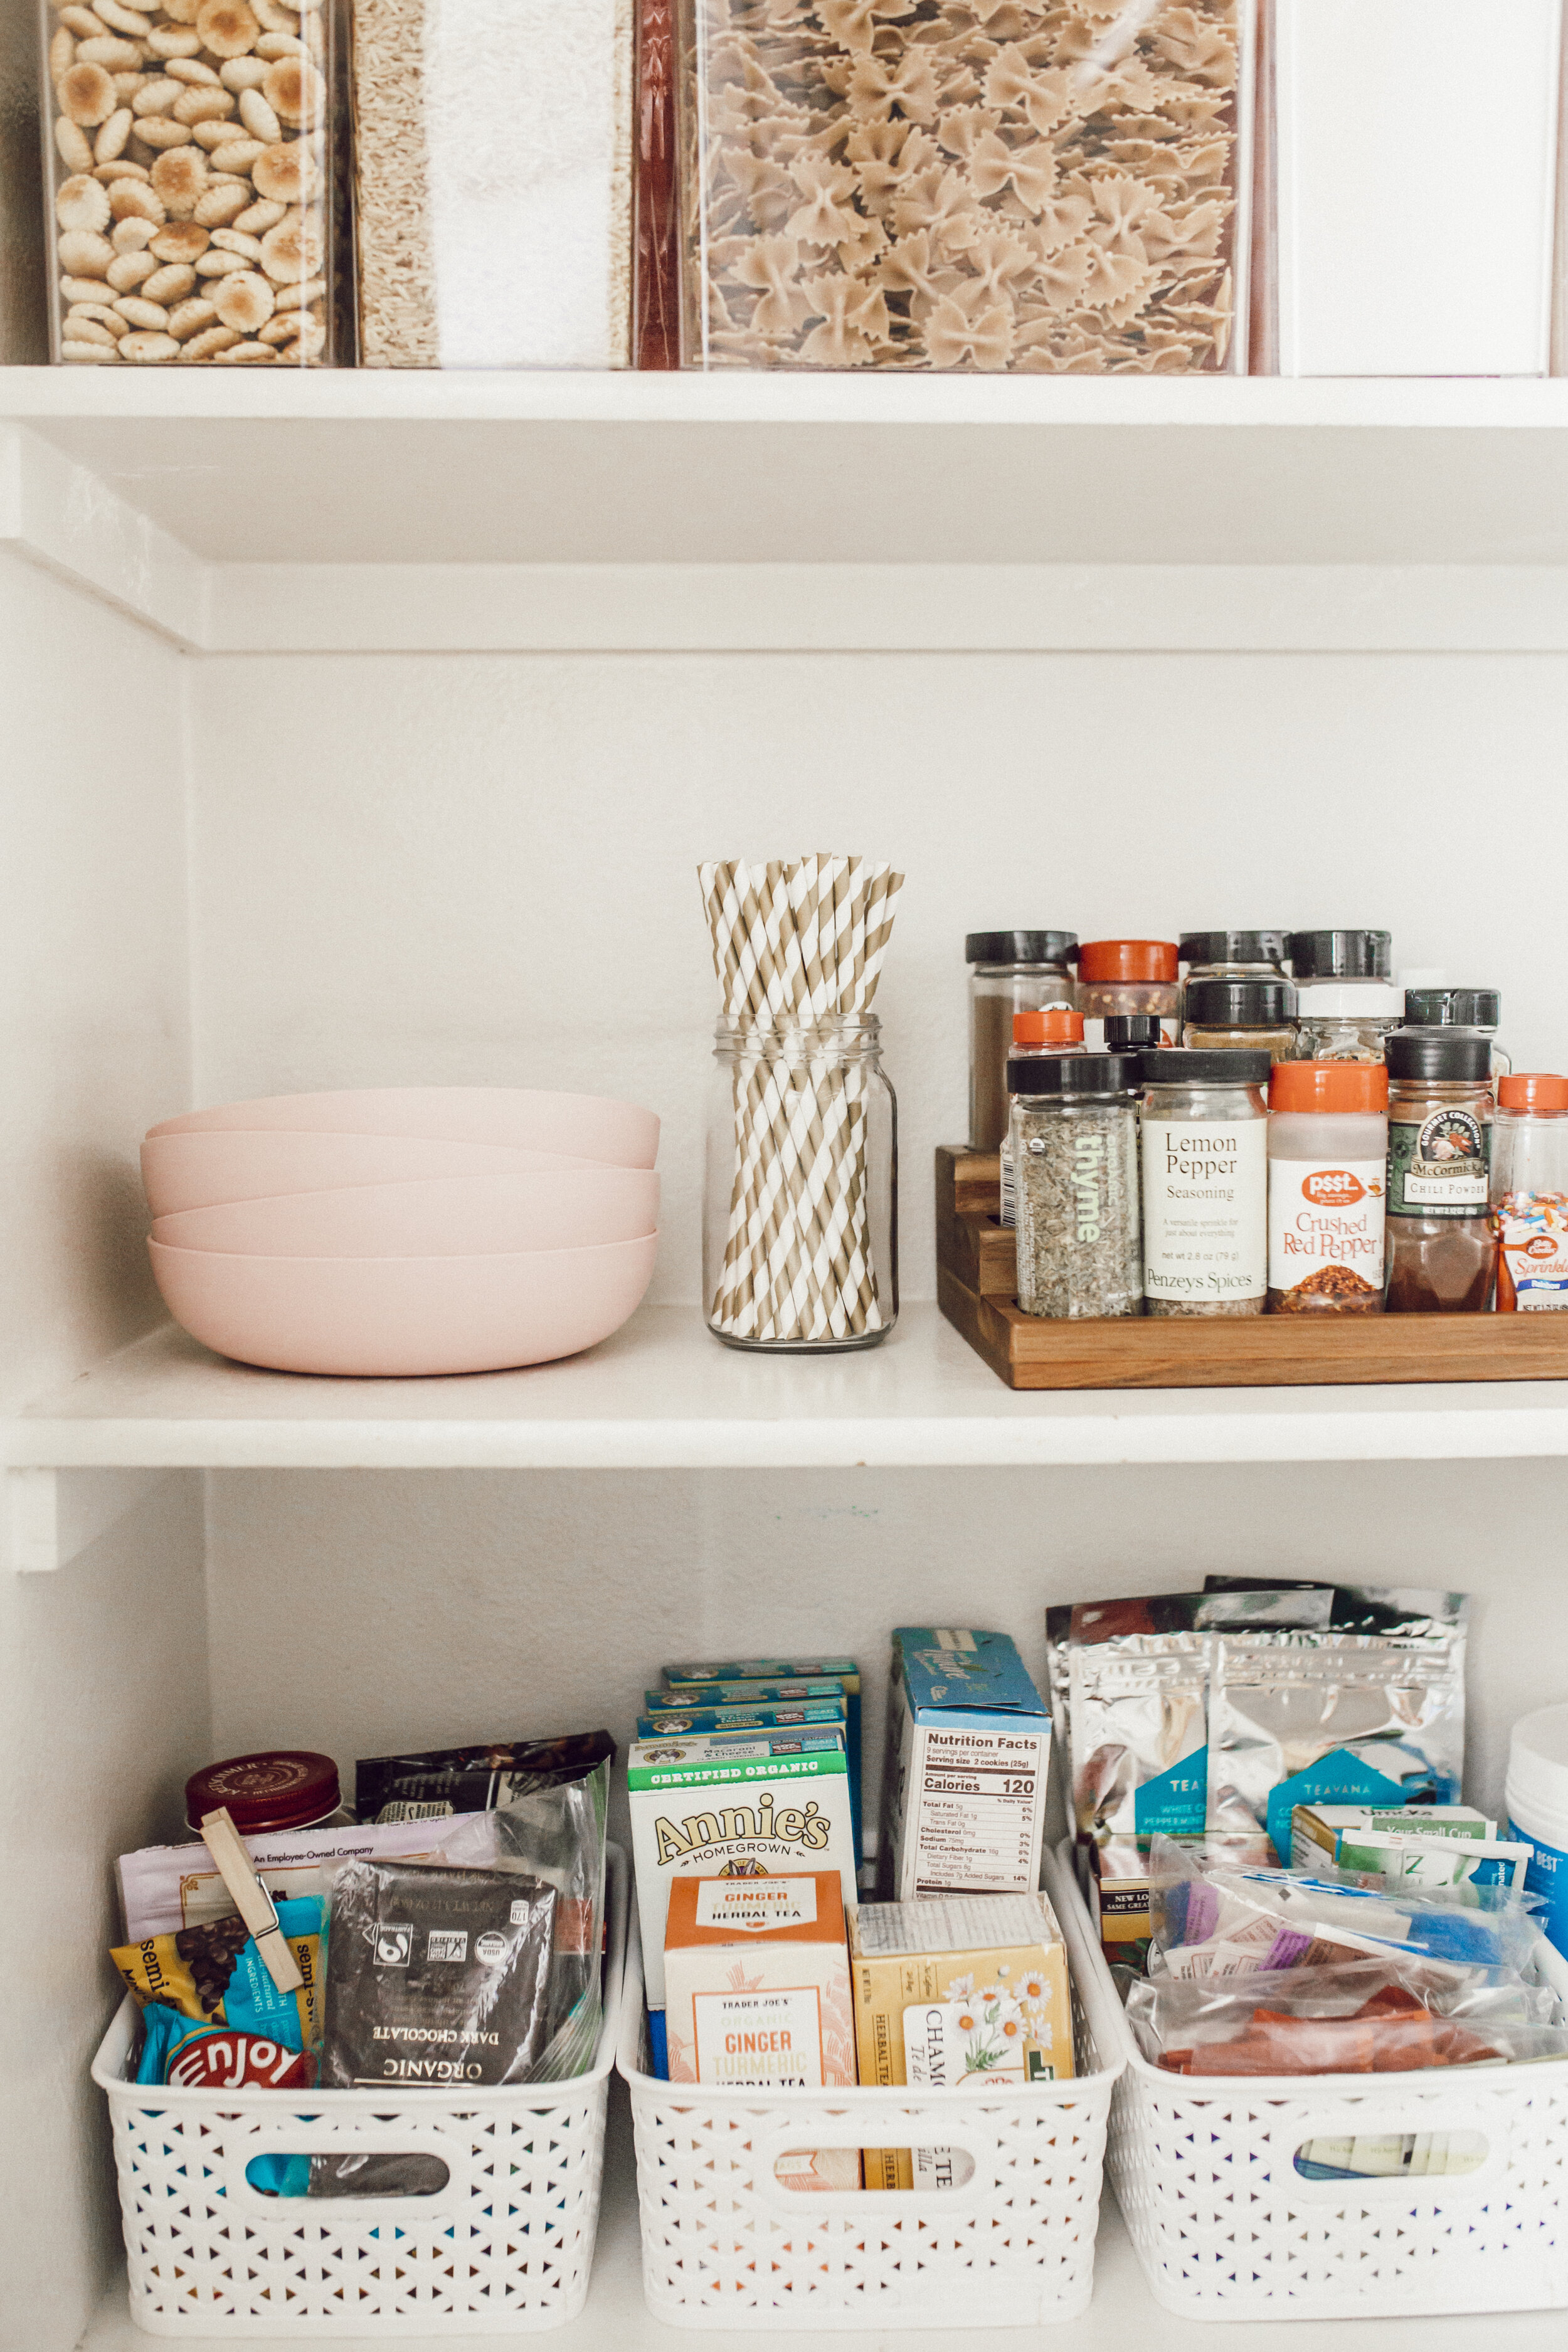 15 Pantry Organization Ideas (For Every Size Of Pantry)